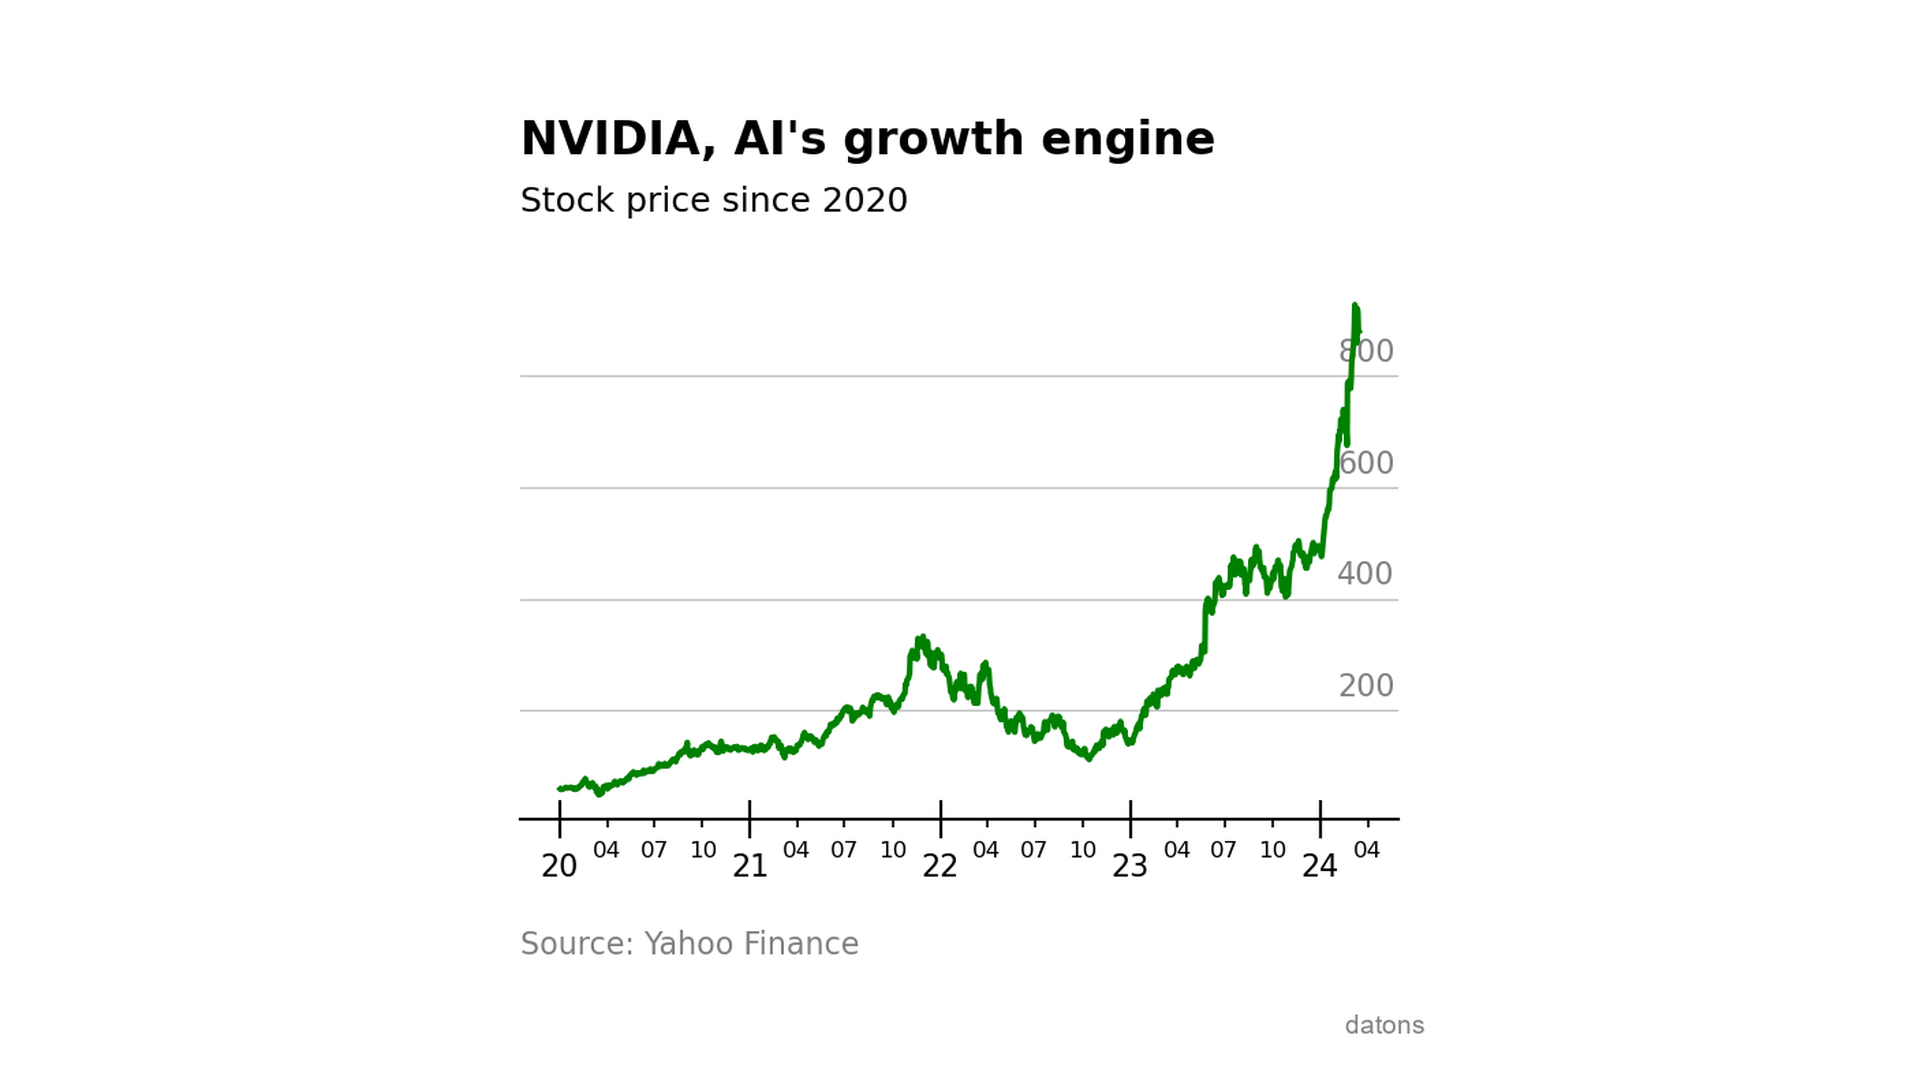 Evolution of the adjusted closing prices of NVIDIA's shares since 2020, highlighting trends and volatilities.